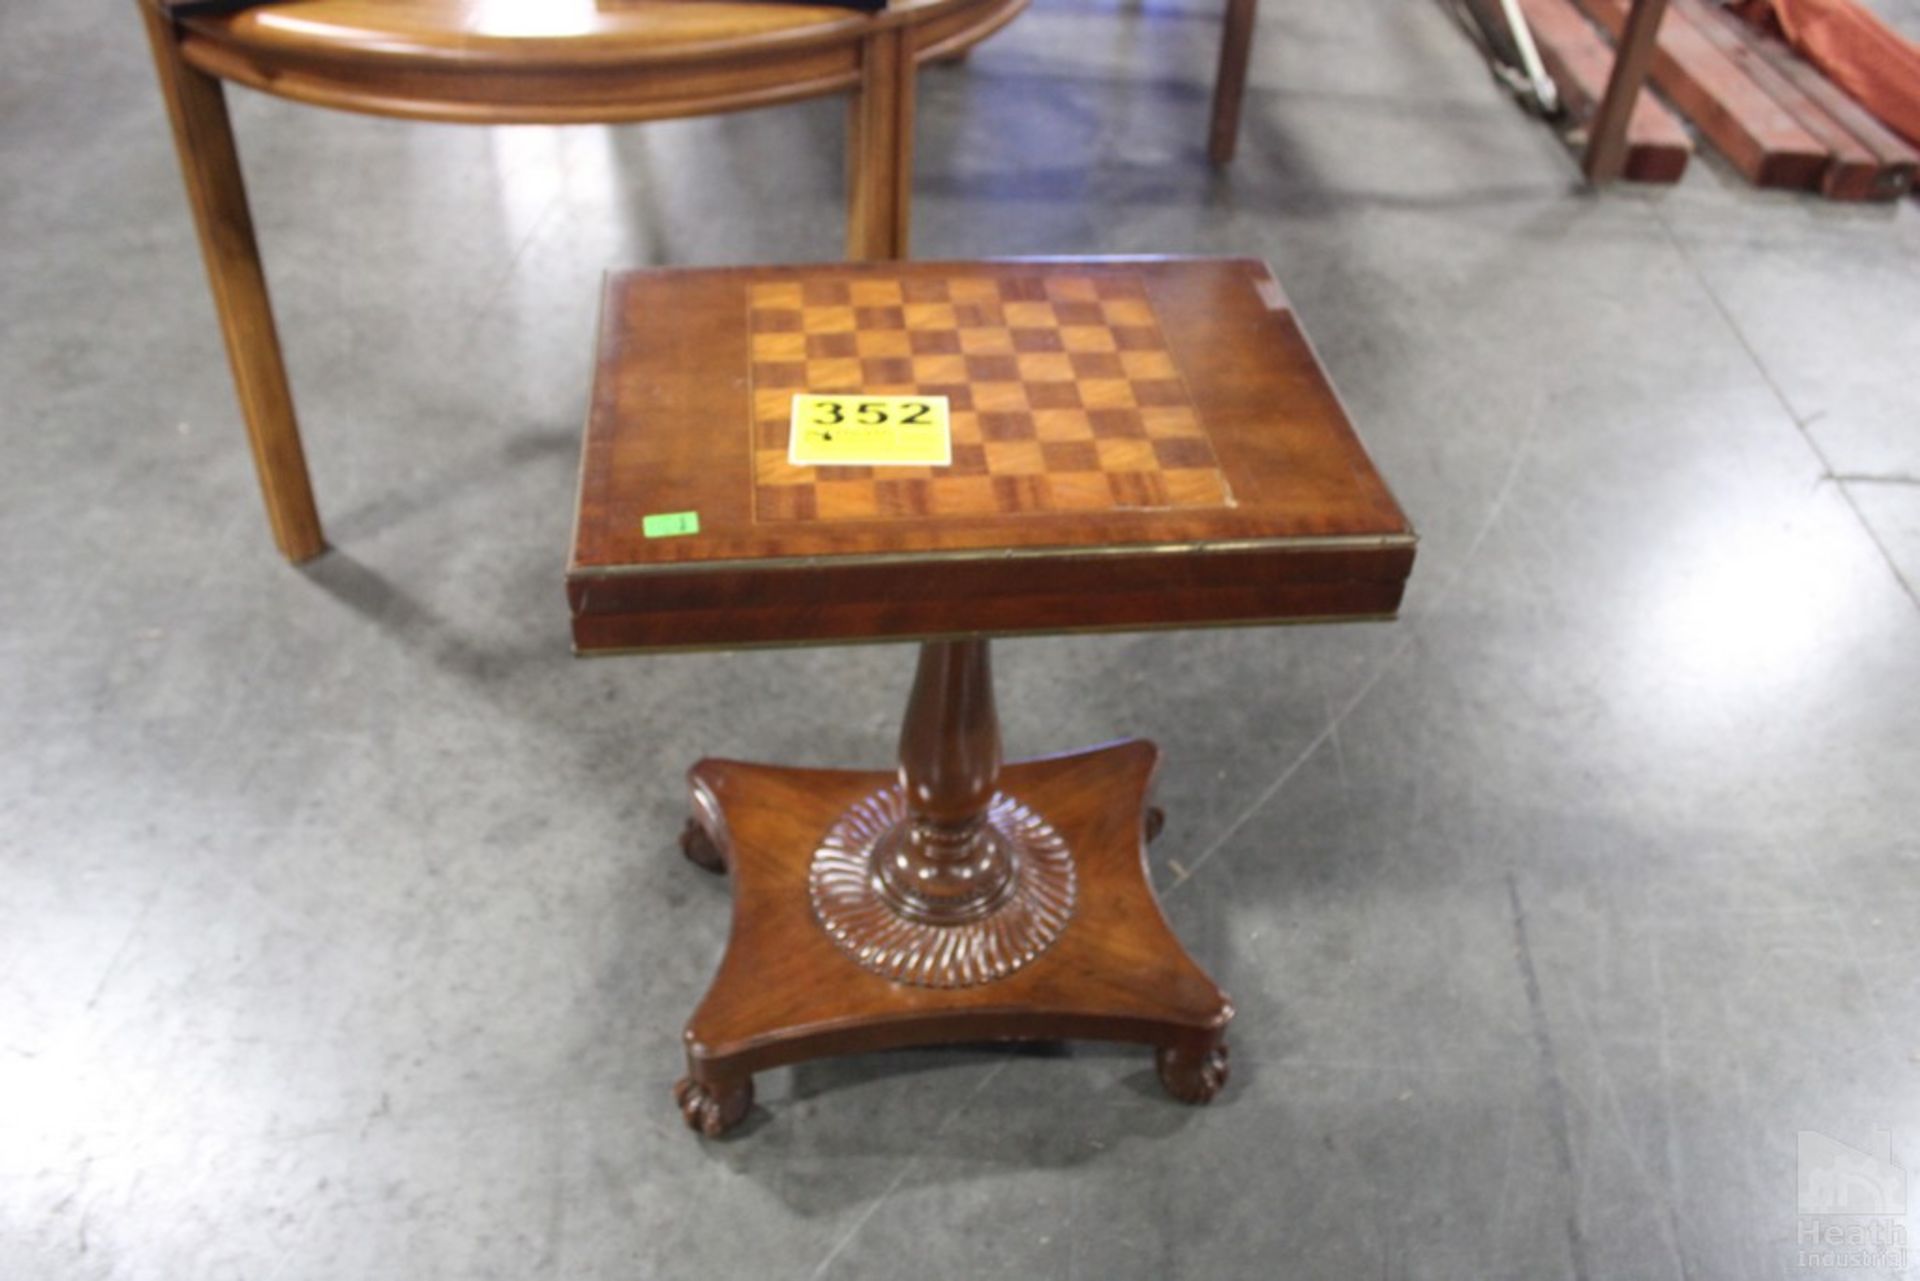 PEDESTAL TABLE WITH CHECKER BOARD AND BACKGAMMON BOARD INSIDE - Image 2 of 3